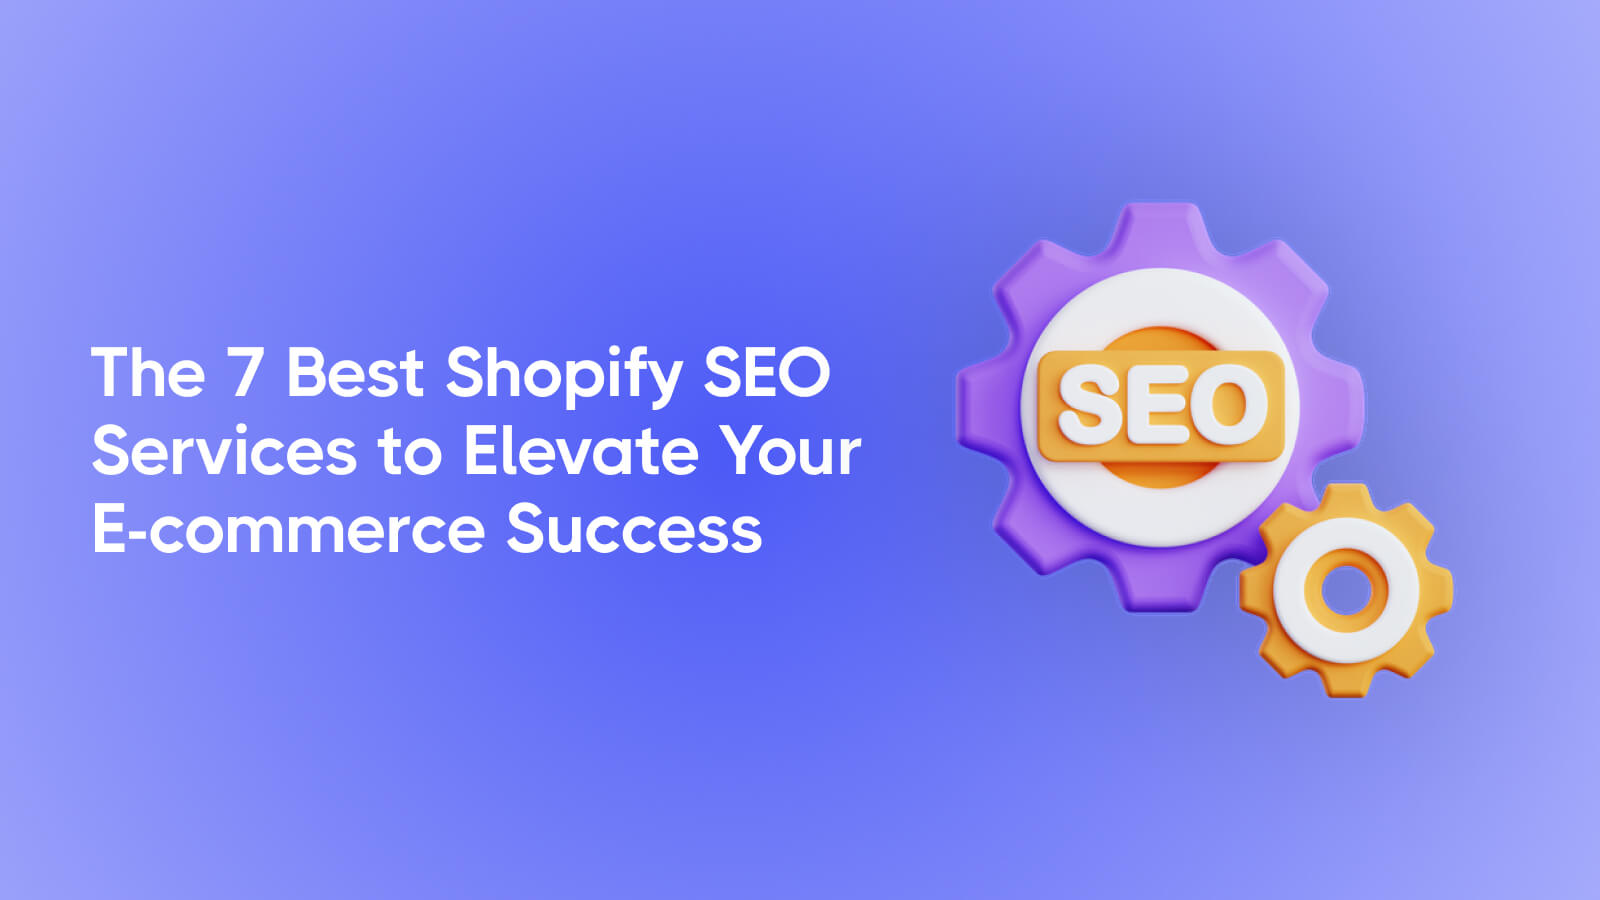 Shopify SEO Services to Elevate Traffic and Rankings